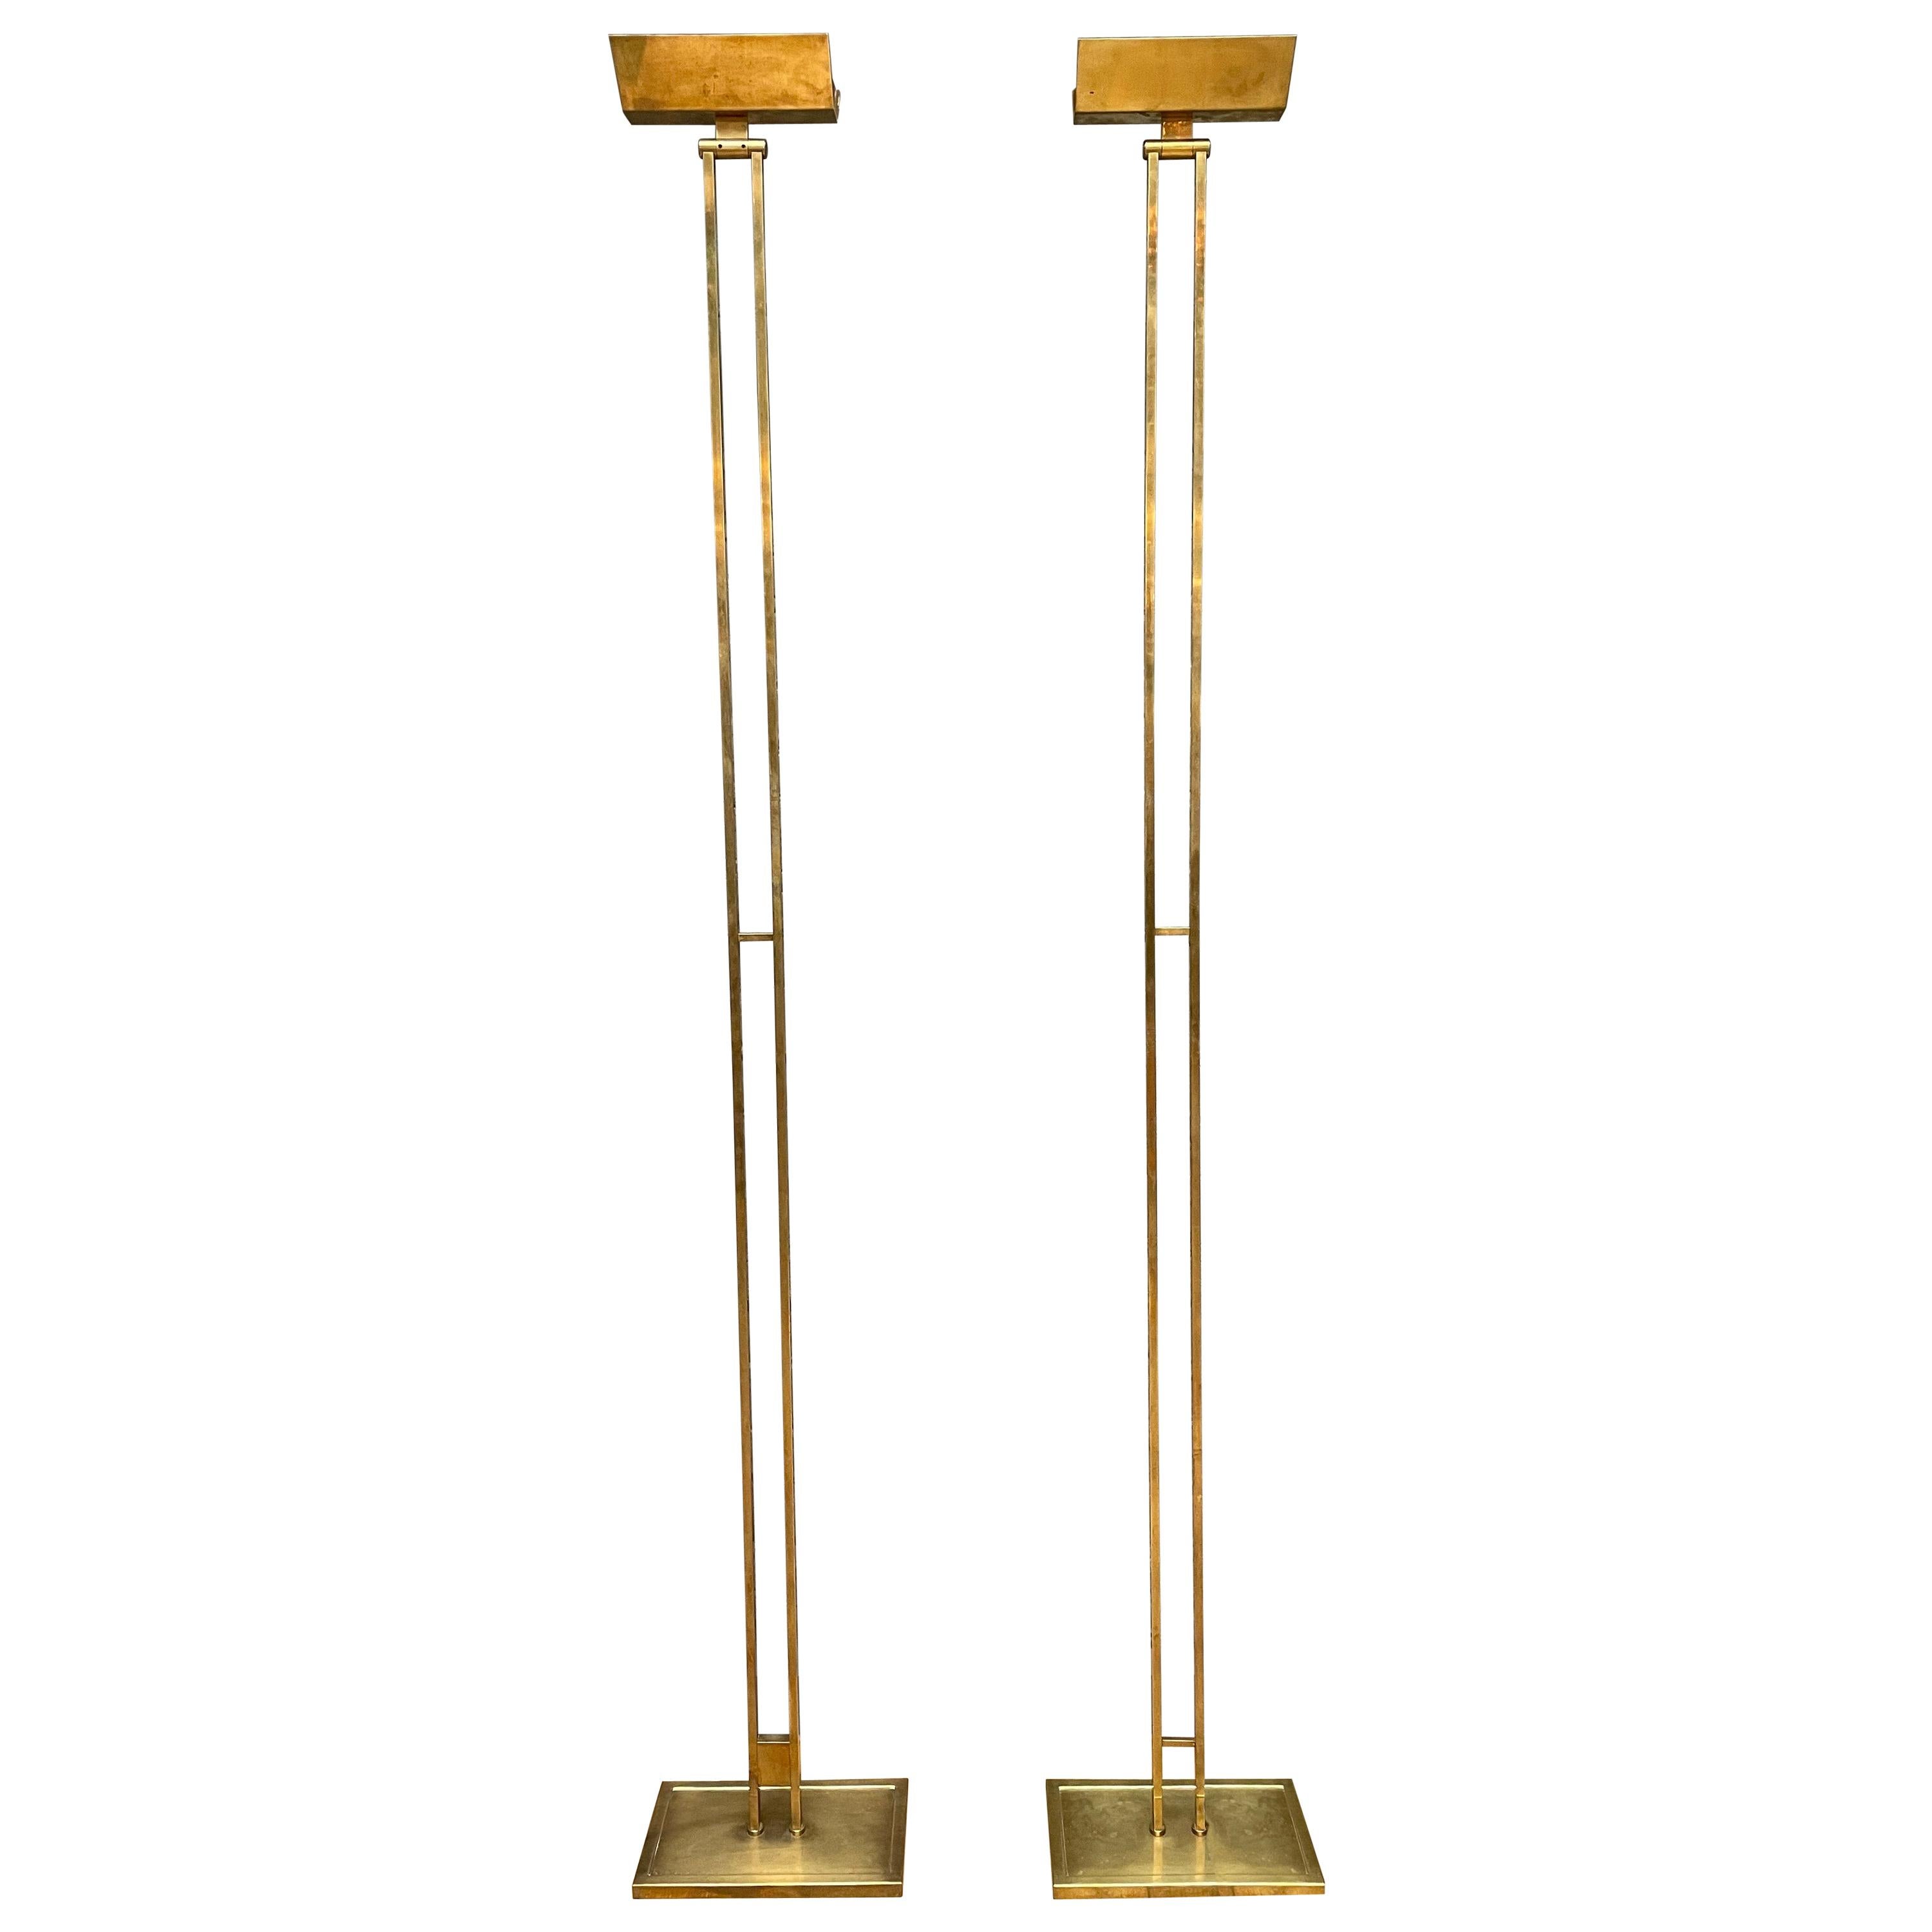 Pair of Tall French Brass Uplighter Floor Lamps